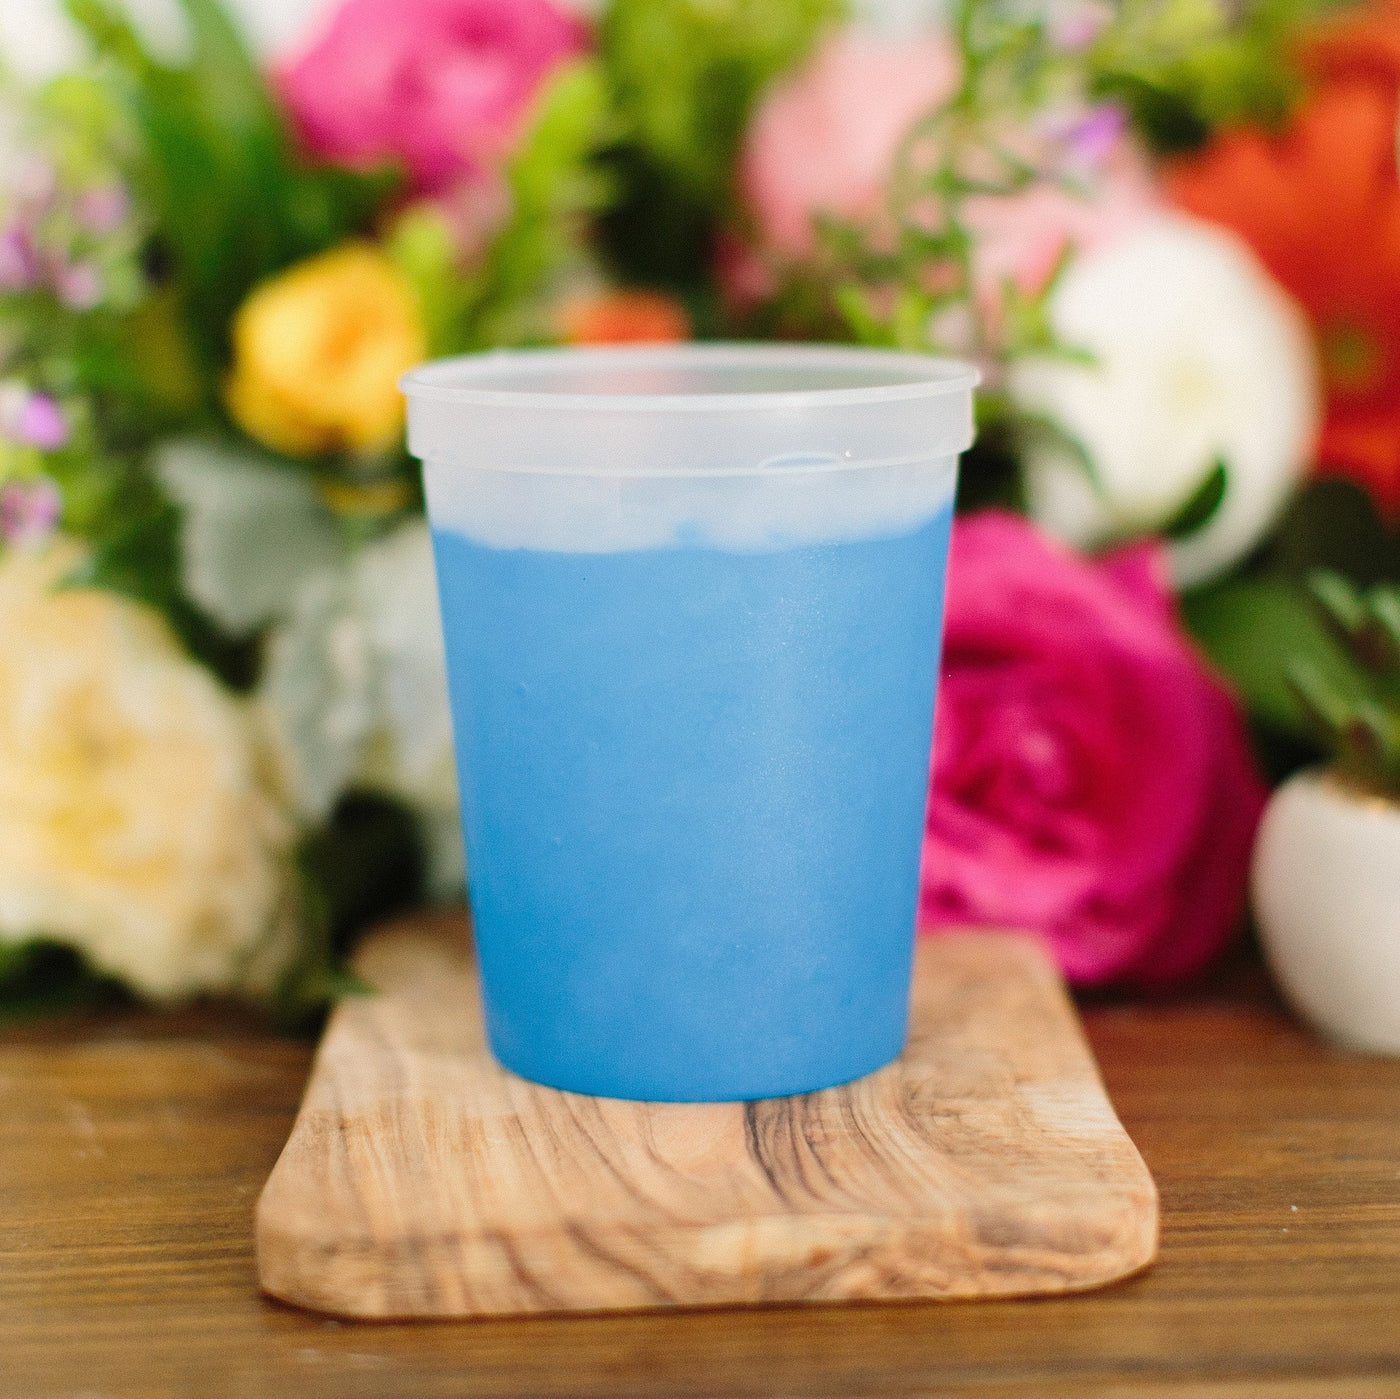 Hipster Wedding Color Changing Cups